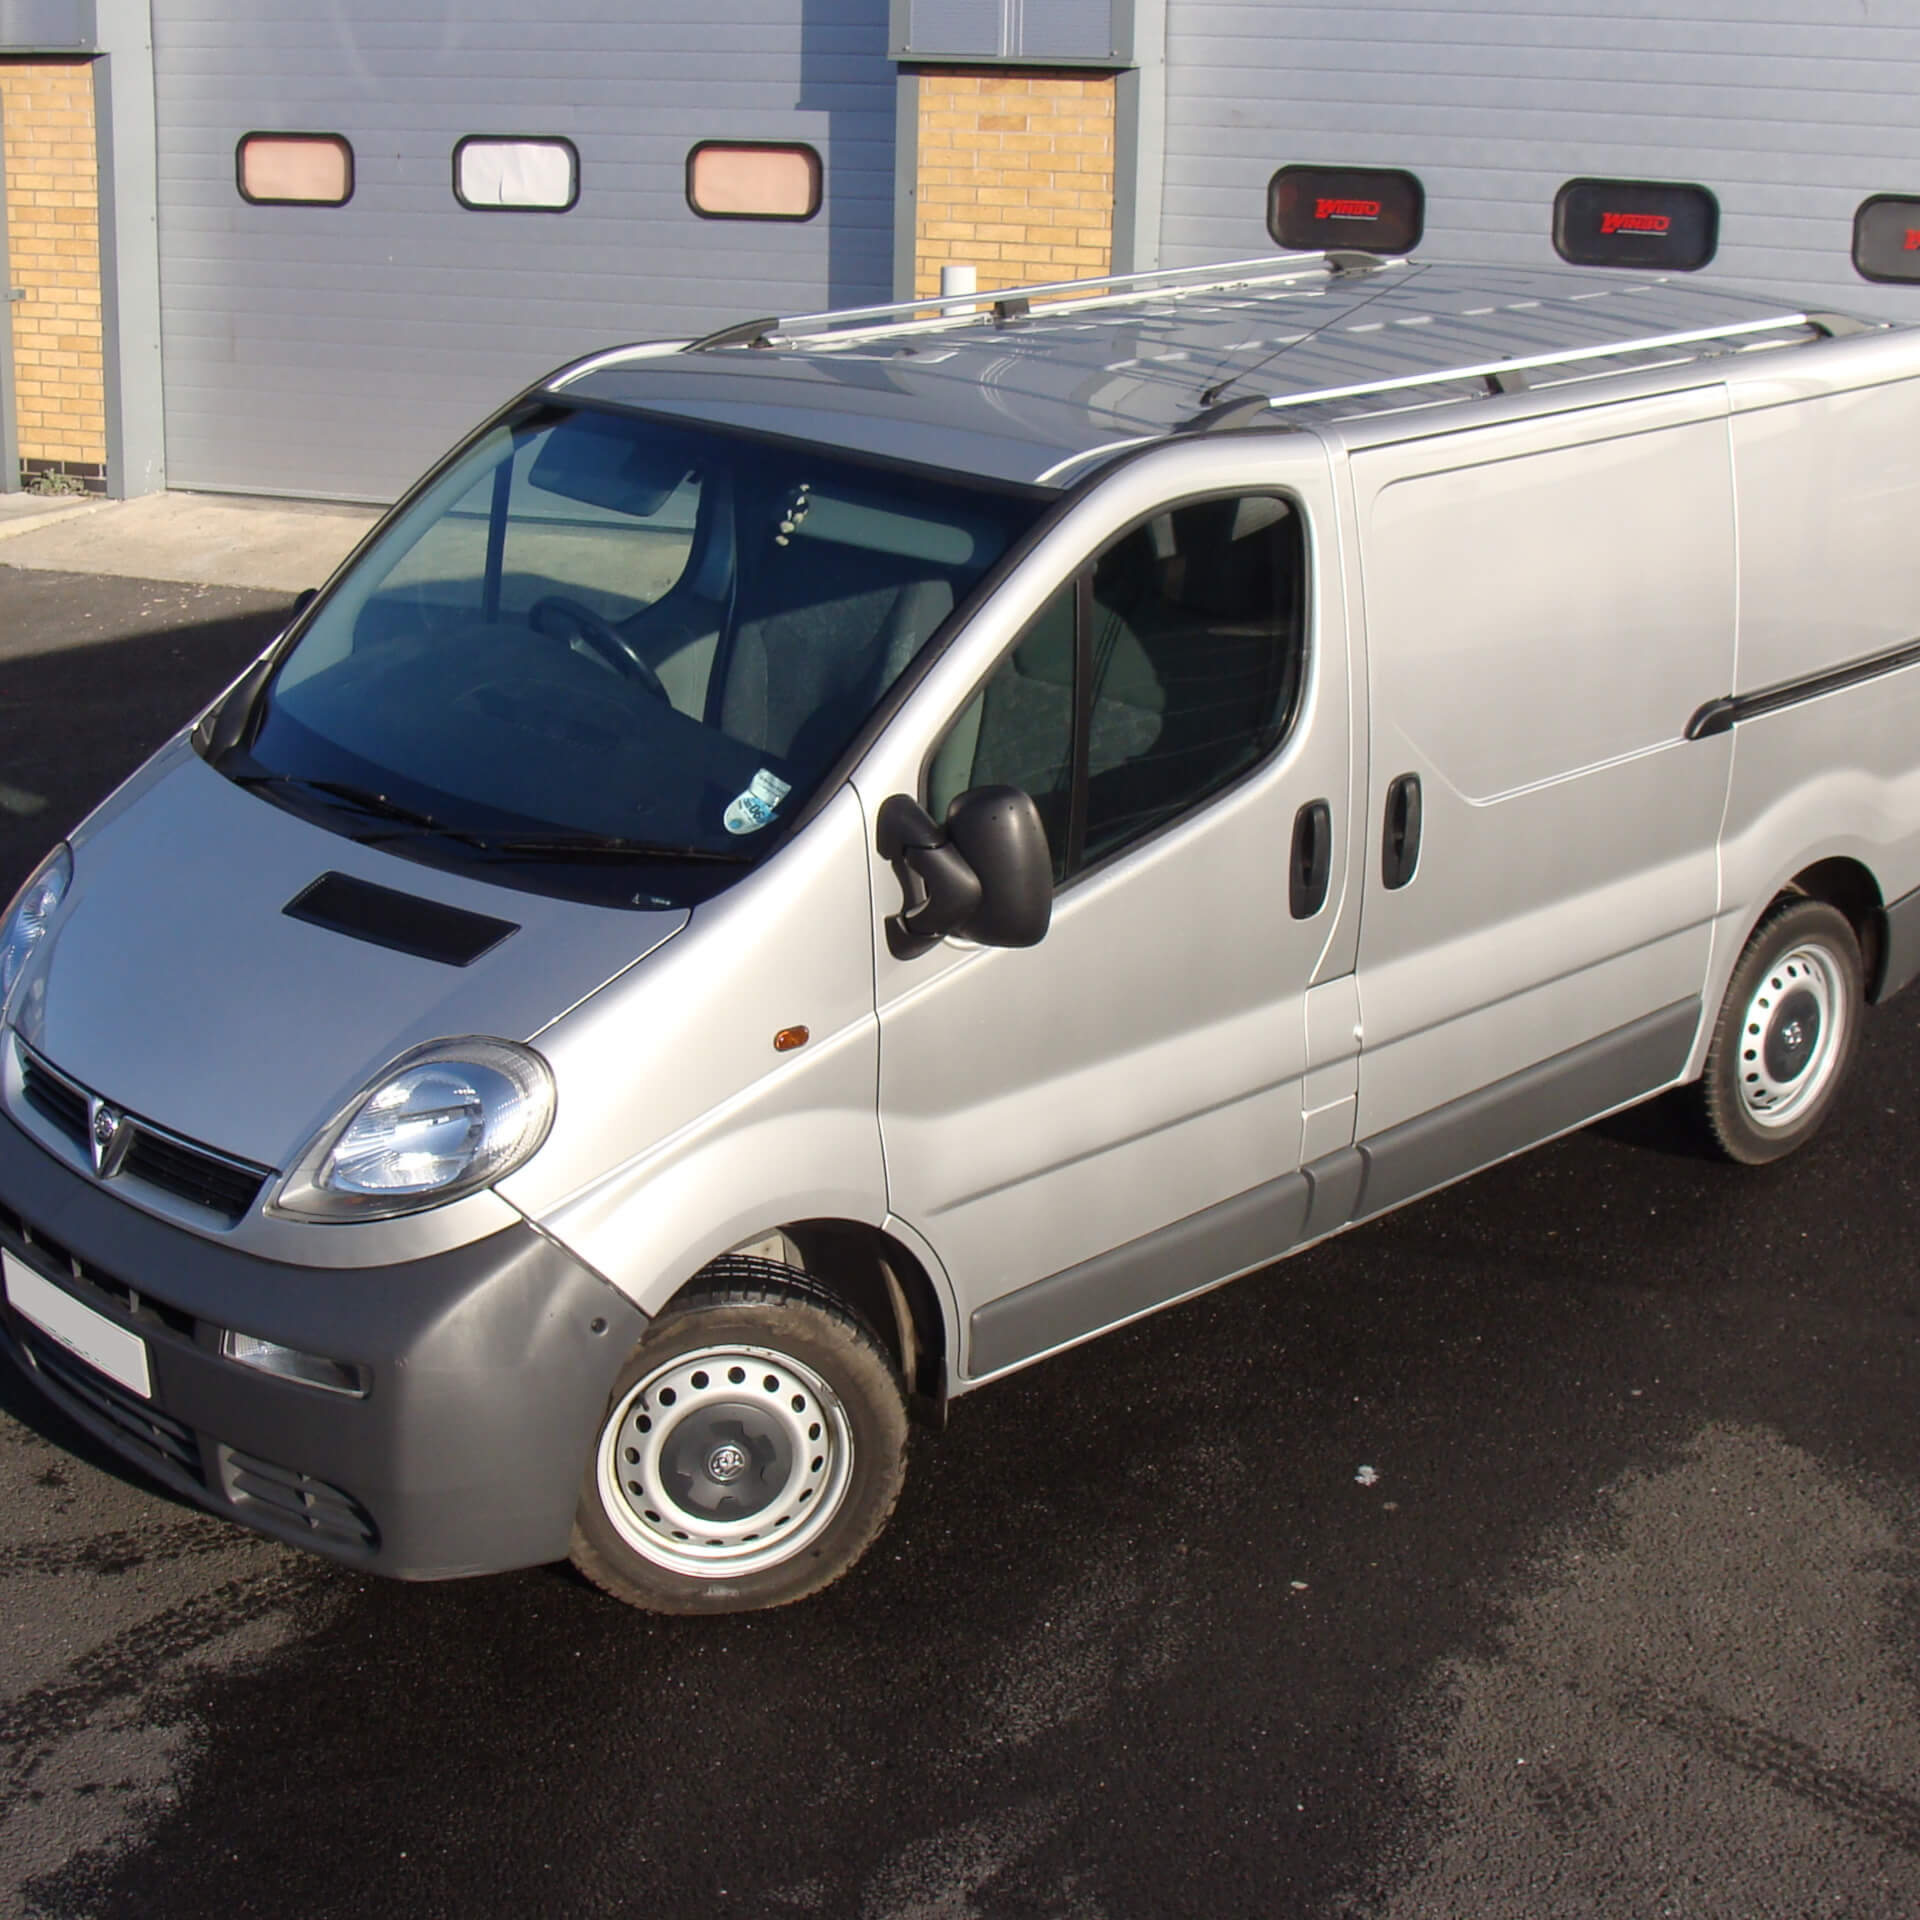 Direct4x4 accessories for Vauxhall Vivaro vehicles with a photo of a silver Vauxhall Vivaro parked outside of a industrial unit